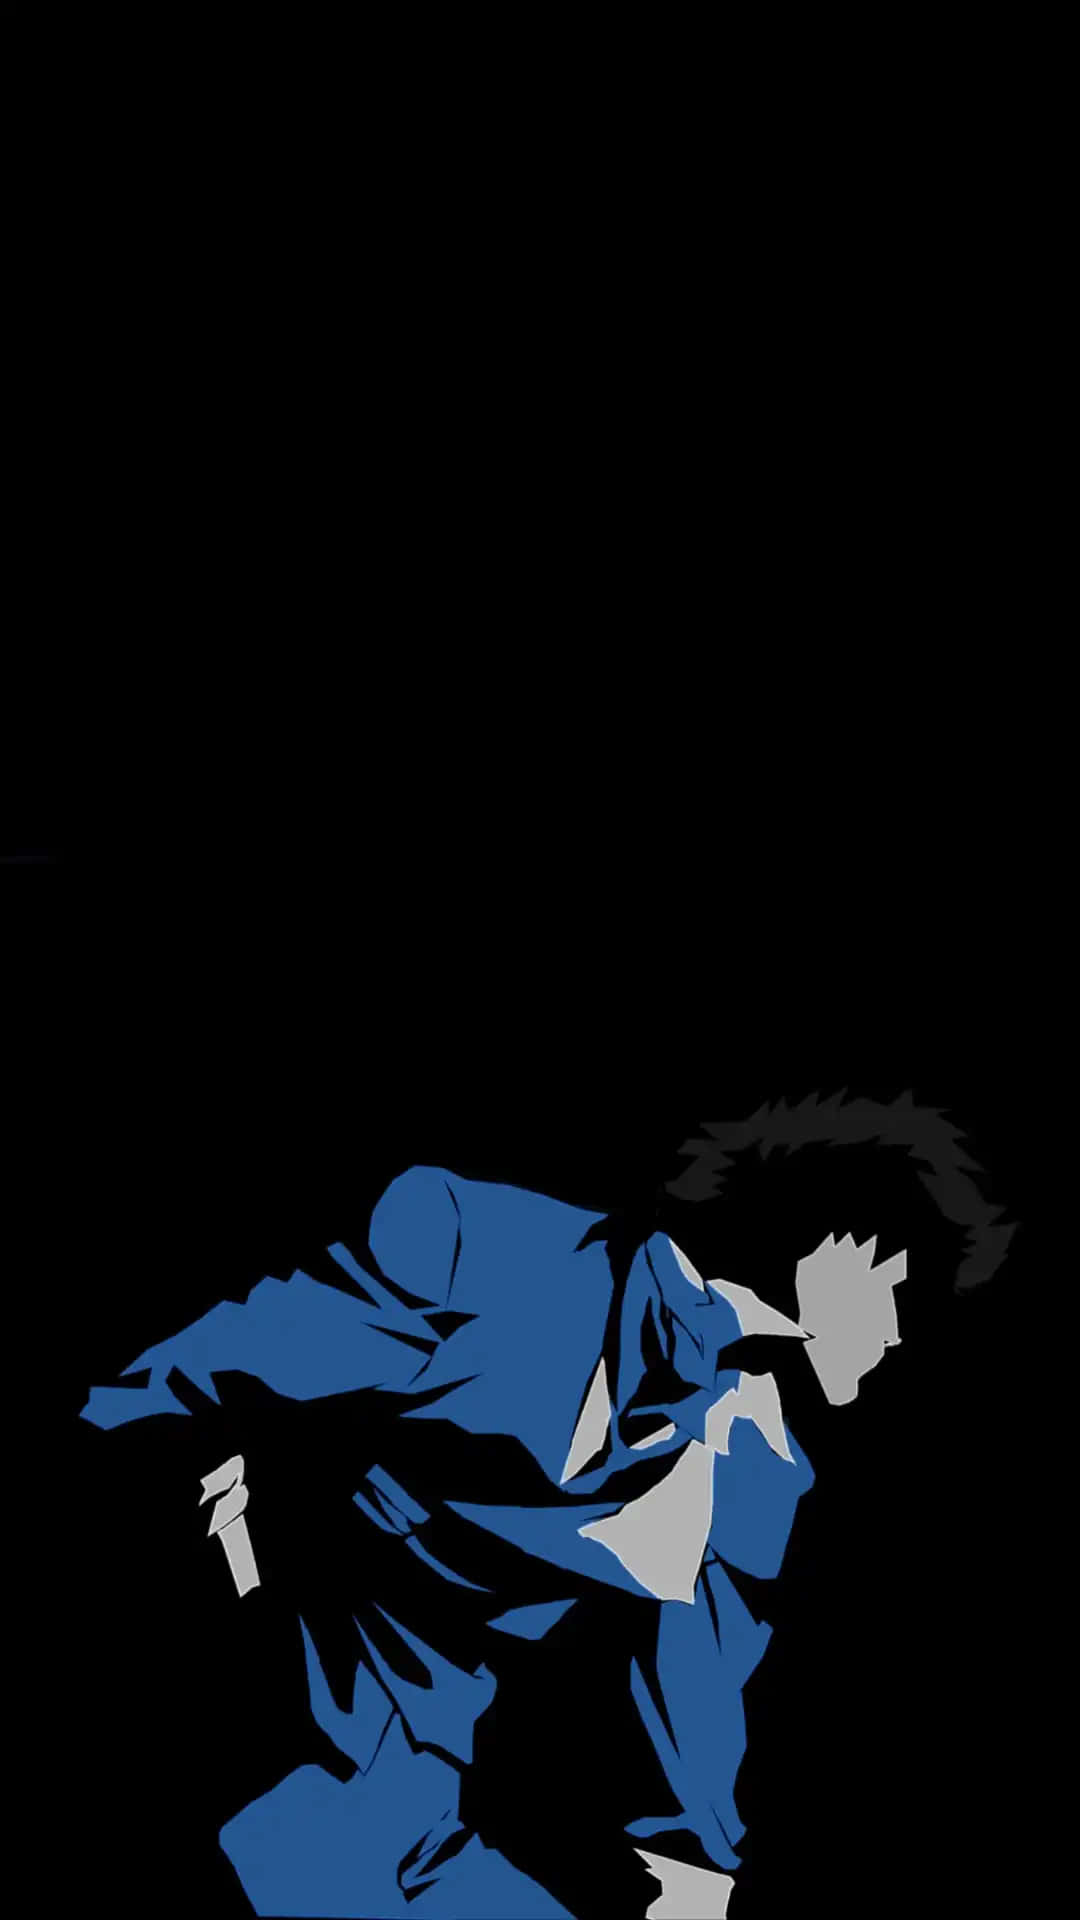 Enjoy the classic anime series Cowboy Bebop on your iPhone Wallpaper